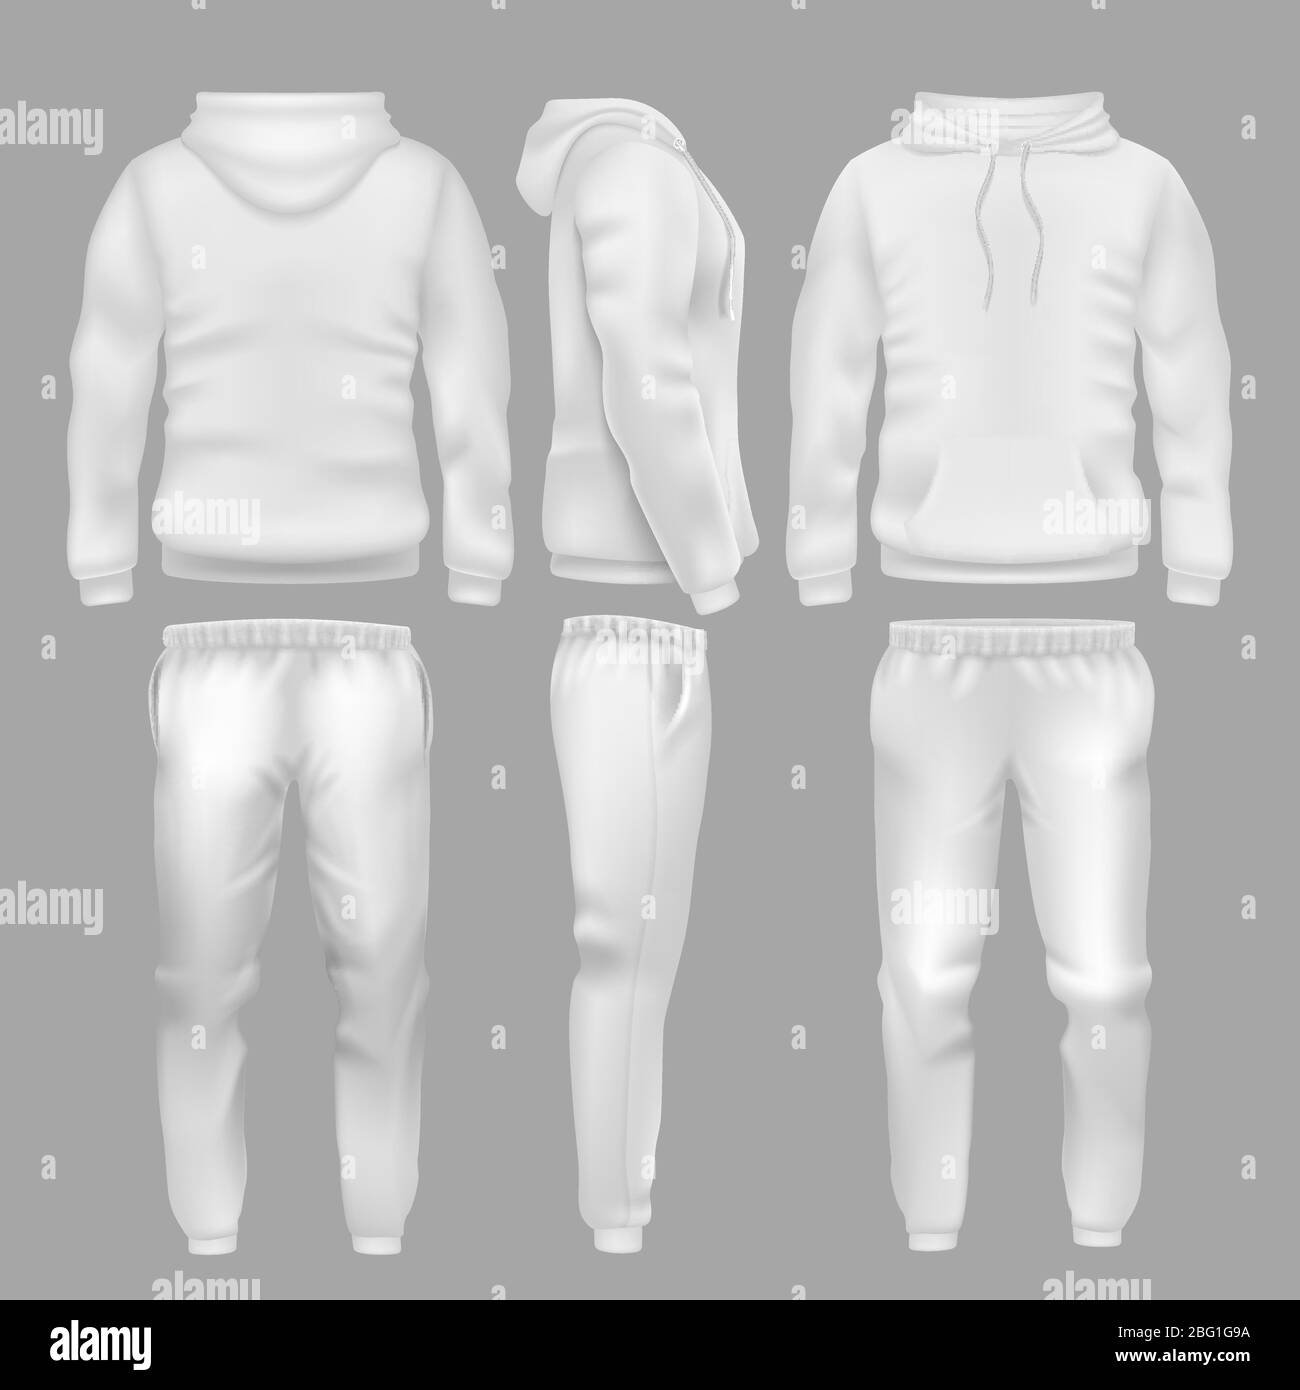 Sweatpants template Black and White Stock Photos & Images - Alamy